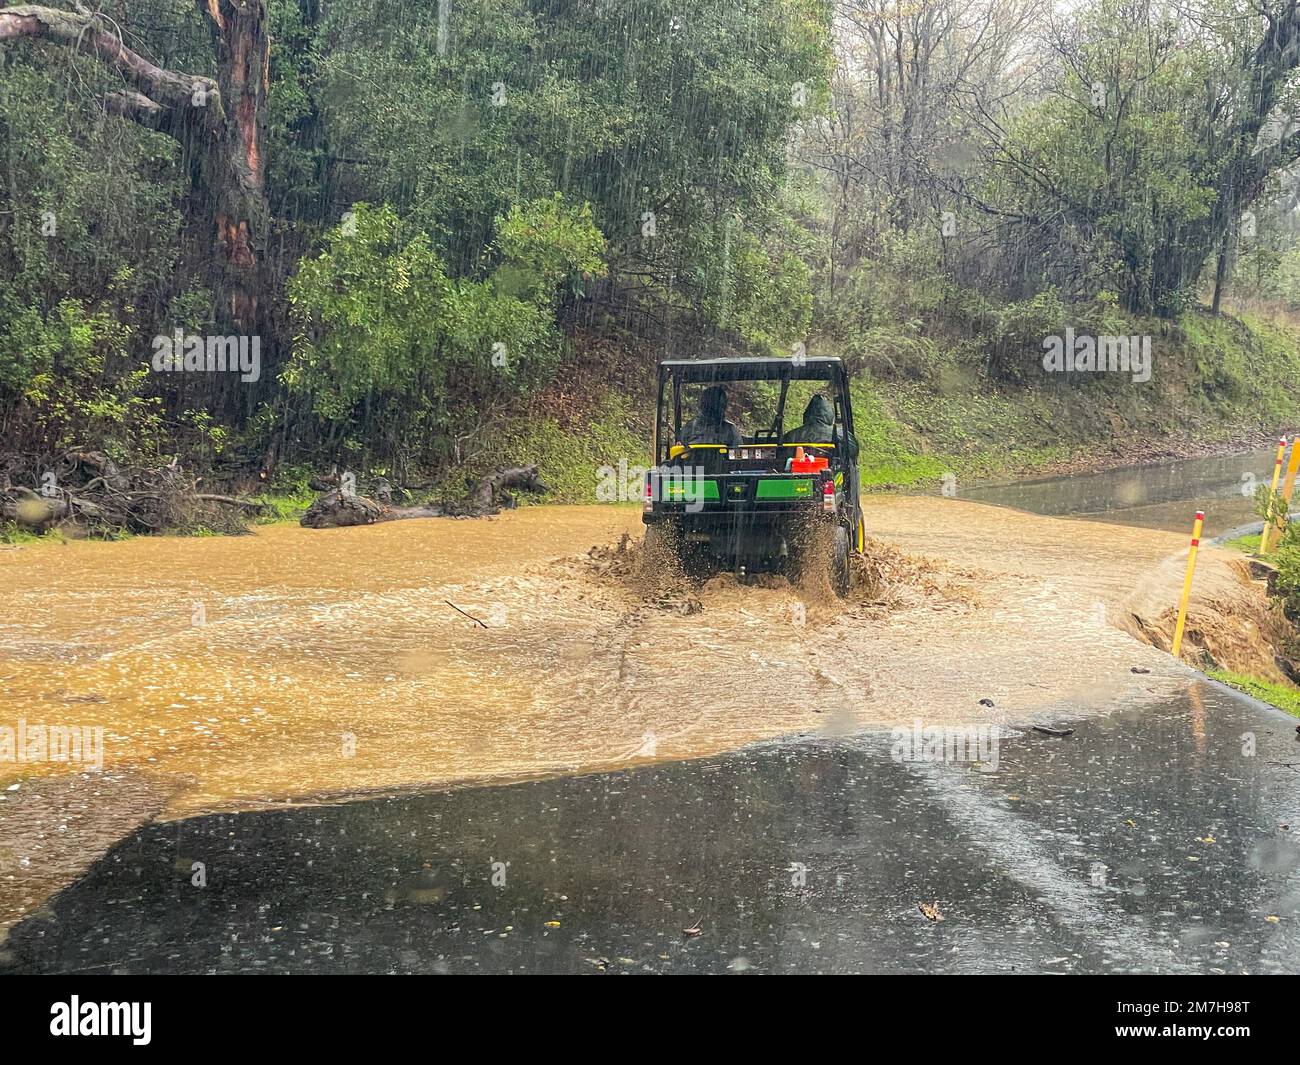 Santa Barbara, California, U.S.A. 9th Jan, 2023. A Rancho Oso Park Ranger attempts to cross a flooded and muddy driveway, on the way to clear a boulder from the road. Flash Flooding in Santa Barbara's Los Padres National Forest has caused residents and vacationers at Rancho Oso Horse Ranch and Campground on Paradise Road to be trapped until rains cease and roads can be cleared.Today marks the exactly the fifth anniversary of the nearby Montecito Mudslides, which killed 23 people, leaving Santa Barbara County on edge. Currently much of the county is under evacuation or stay-at-home orde Stock Photo